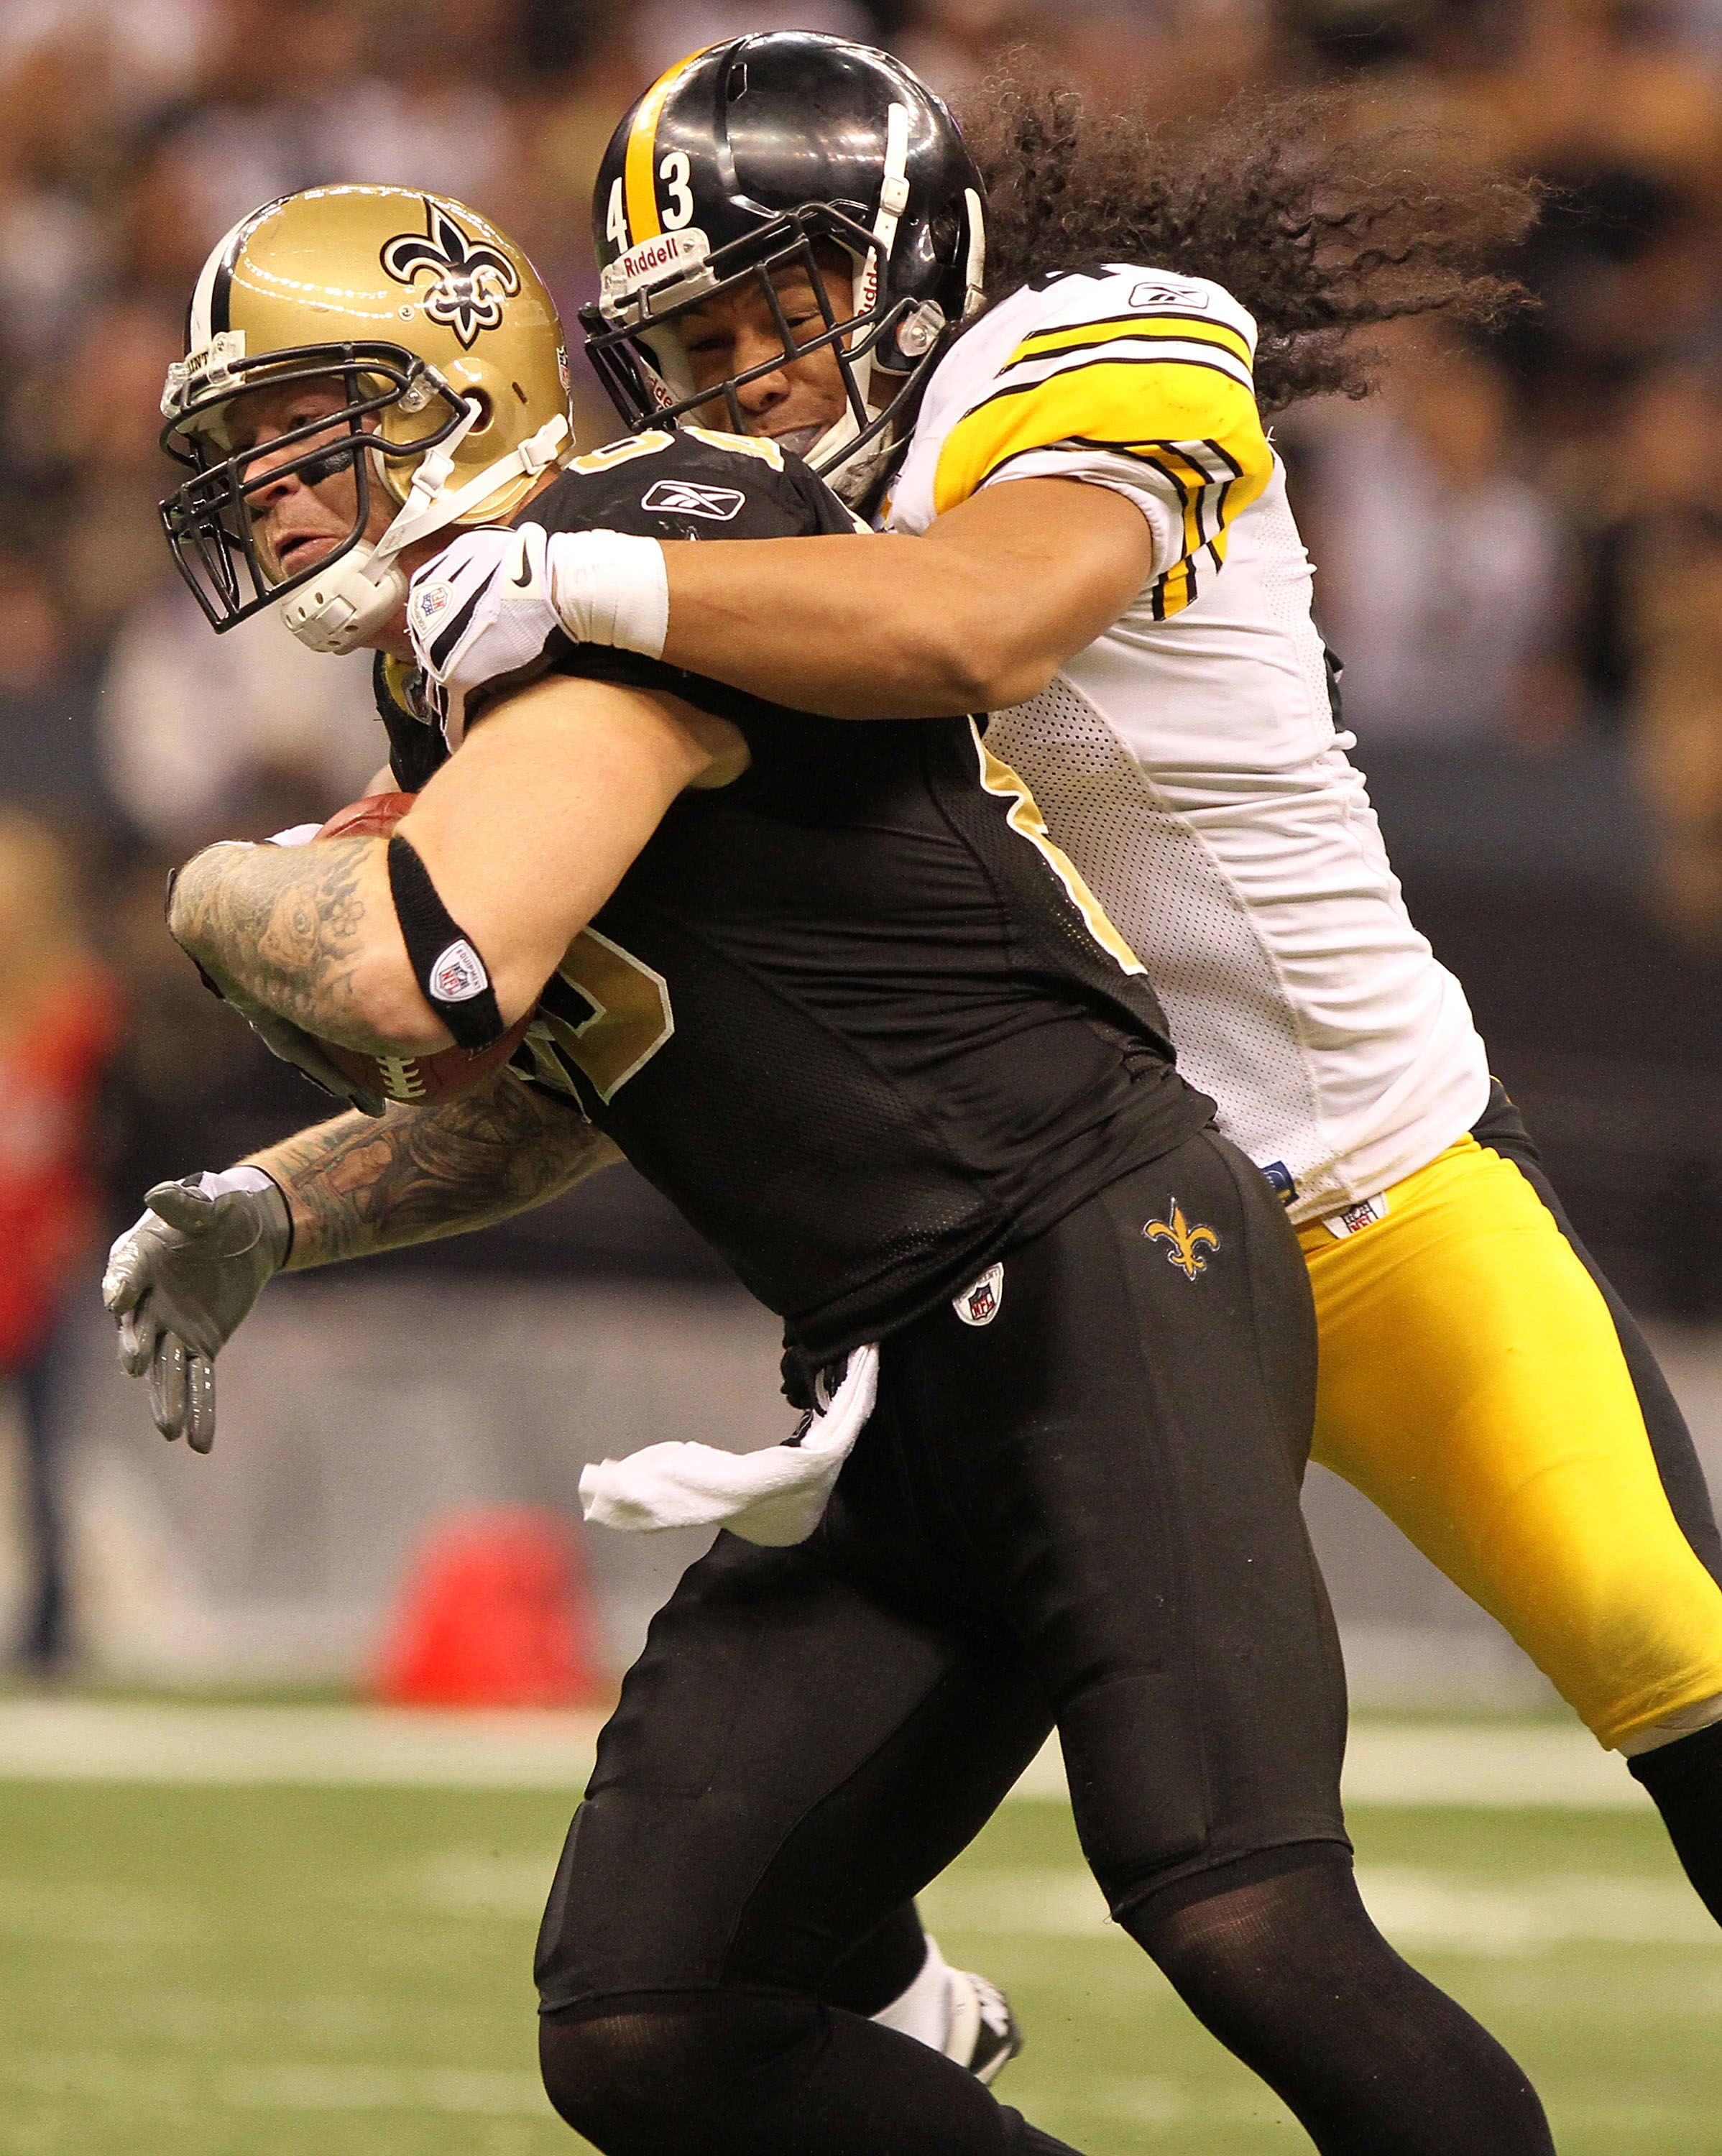 NEW ORLEANS, LA - OCTOBER 31: Jeremy Shockey #88 of the New Orleans Saints is tackled by Troy Polamalu #43 of the Pittsburgh Steelers at the Louisiana Superdome on October 31, 2010 in New Orleans, Louisiana. (Photo by Matthew Sharpe/Getty Images)